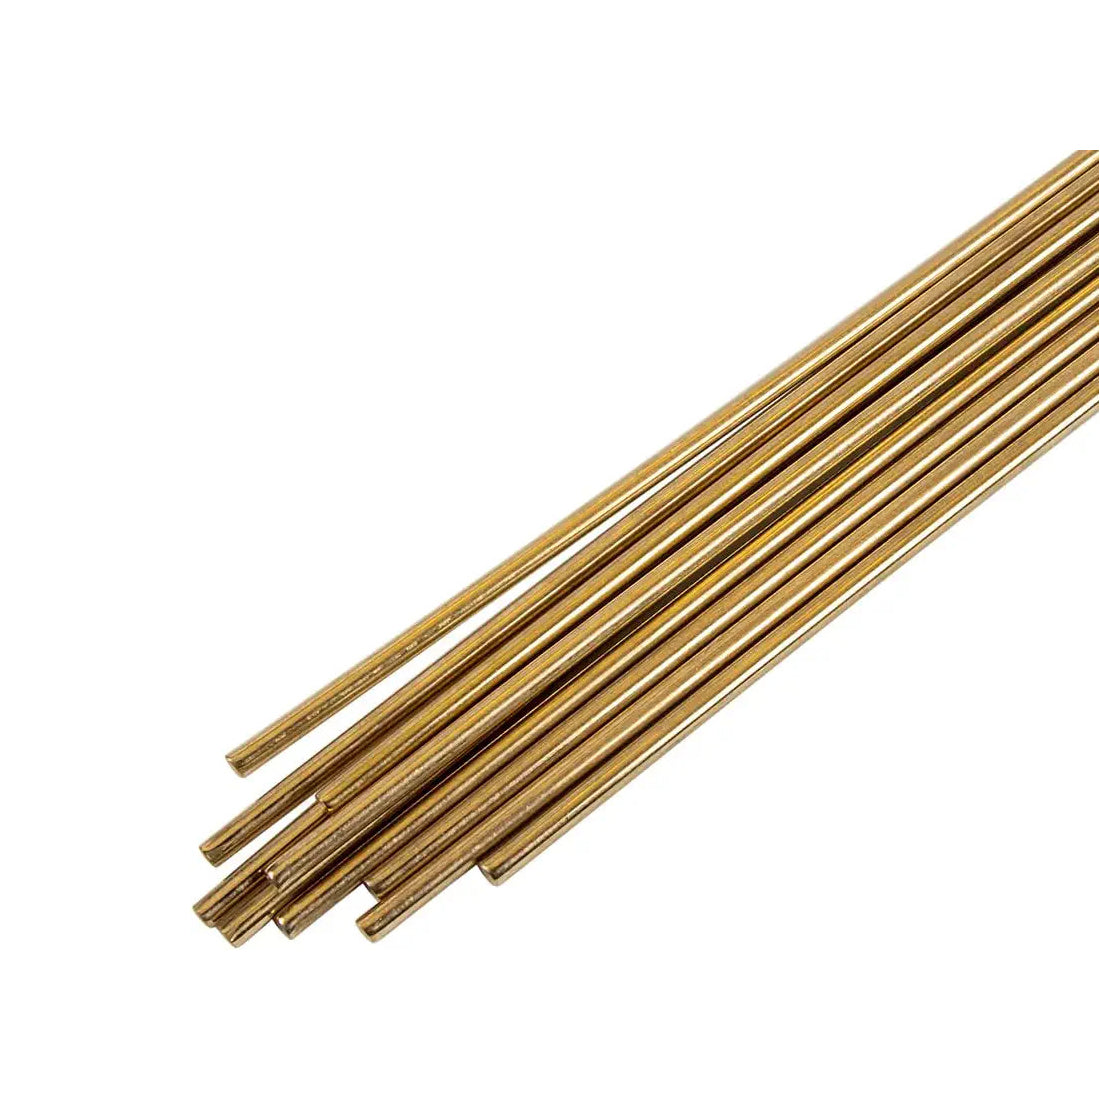 JCUSN 1/2 lb 9 Rods Bronze Brazing Rods Low Temperature For Propane Torch Copper Tin Alloy Welding Rods Soldering Rods Brass Welding Accessories